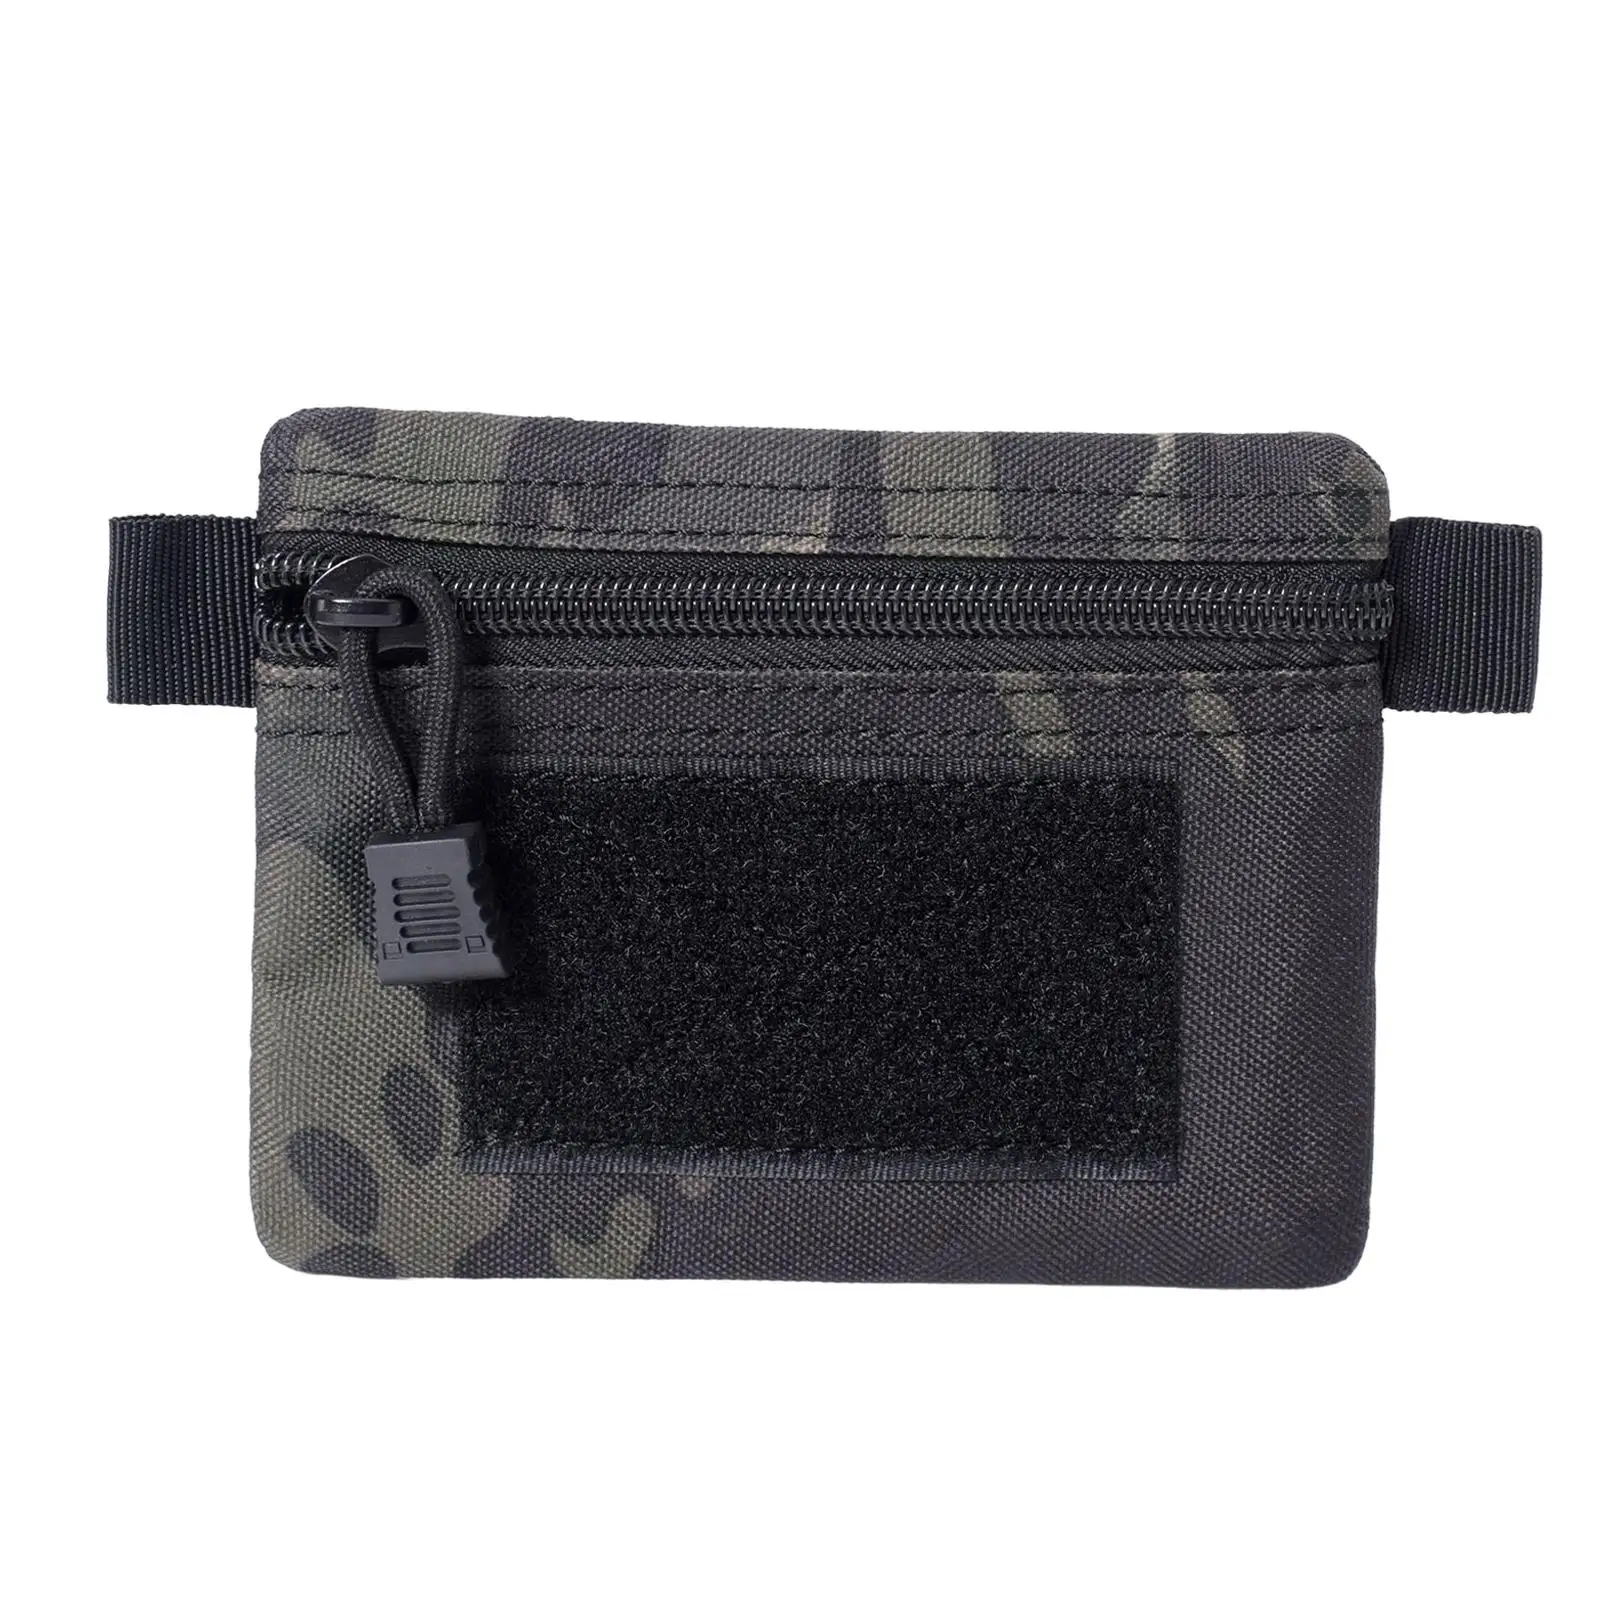 Outdoor Wallet Nylon Pouch Waist Bag Credit Card Storage Cards Holder for Outdoor Hunting